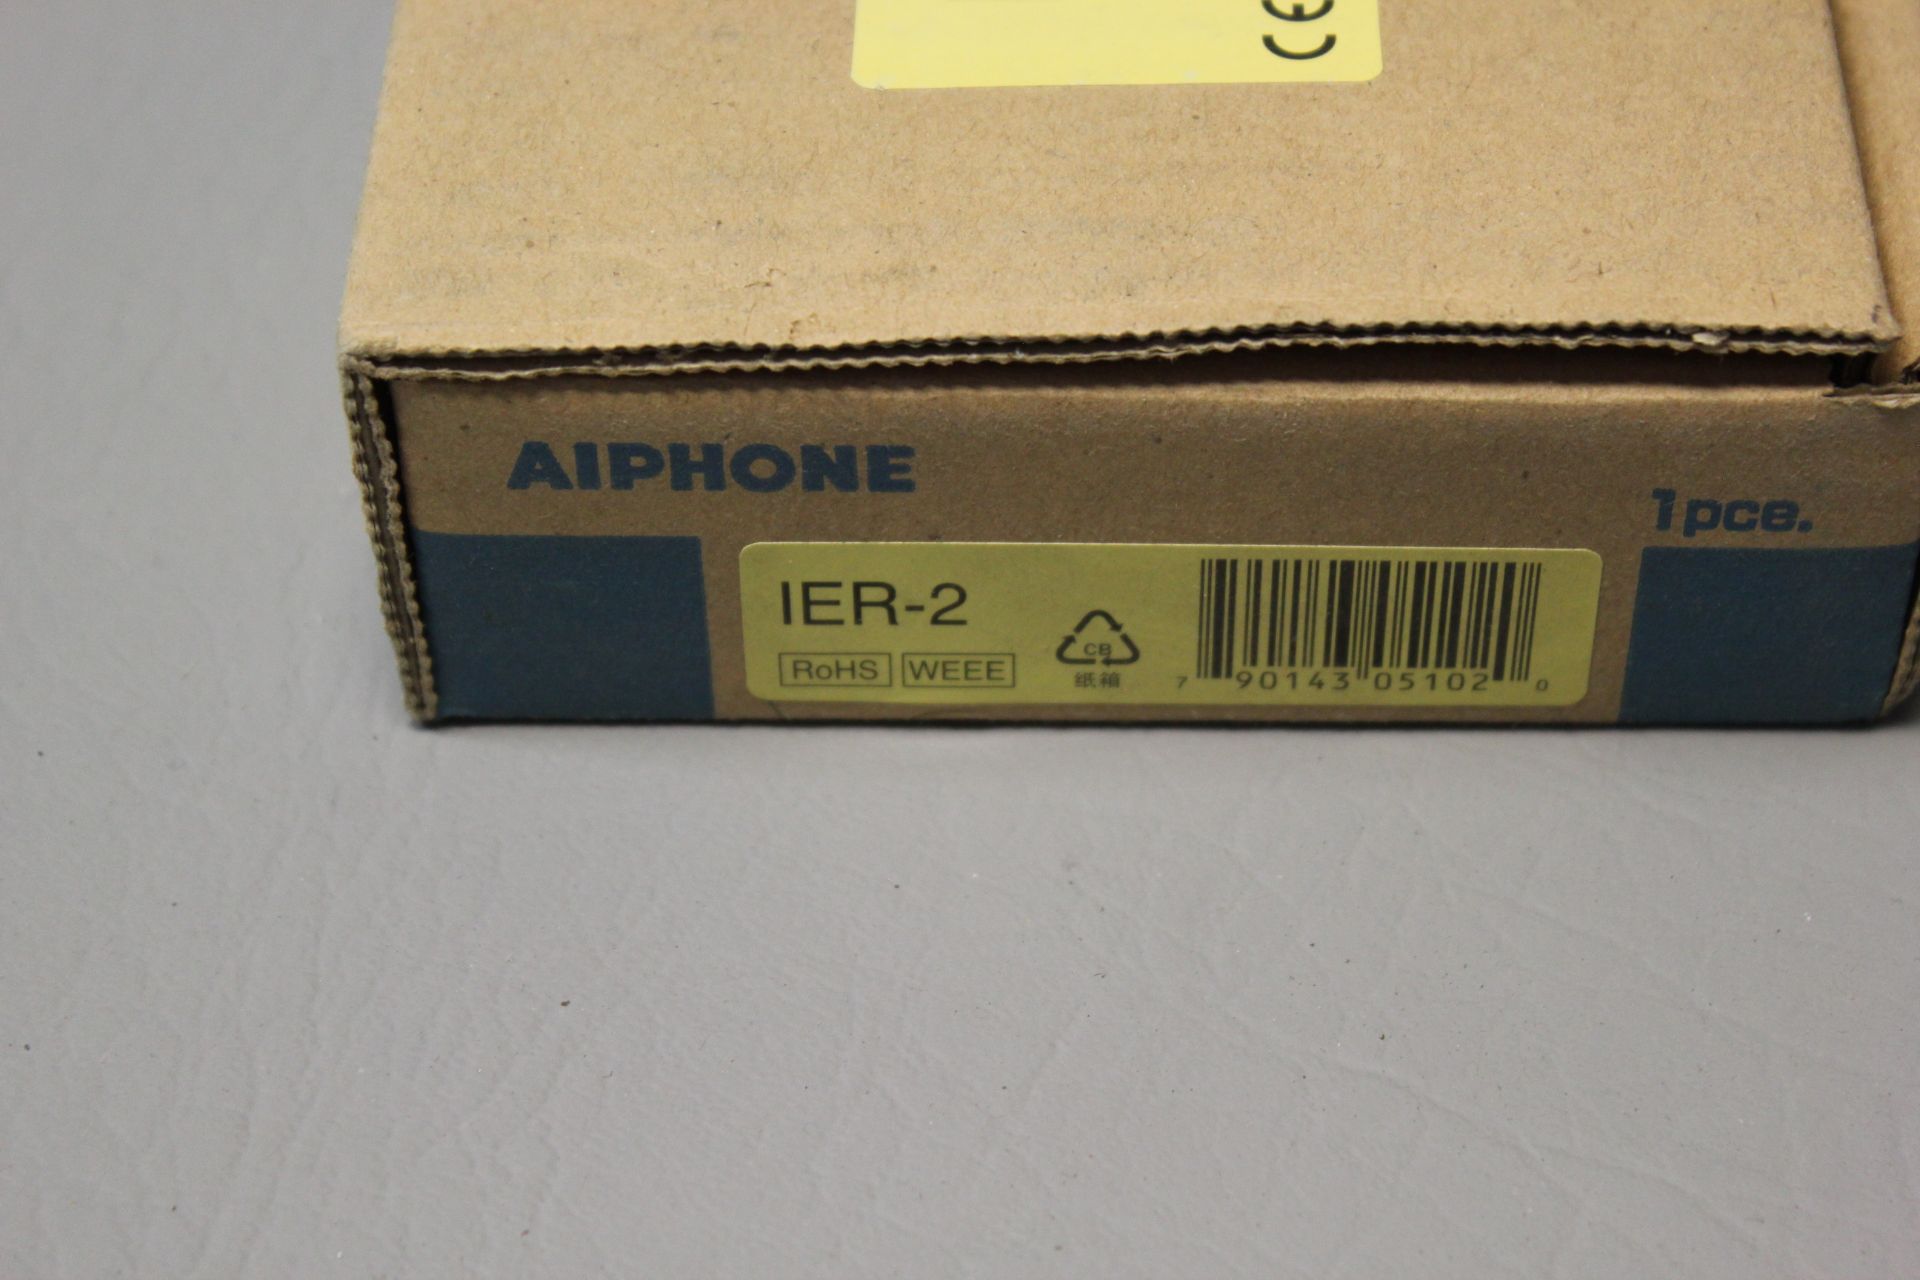 LOT OF NEW AIPHONE INTERCOM EXTENSION SPEAKER - Image 2 of 3